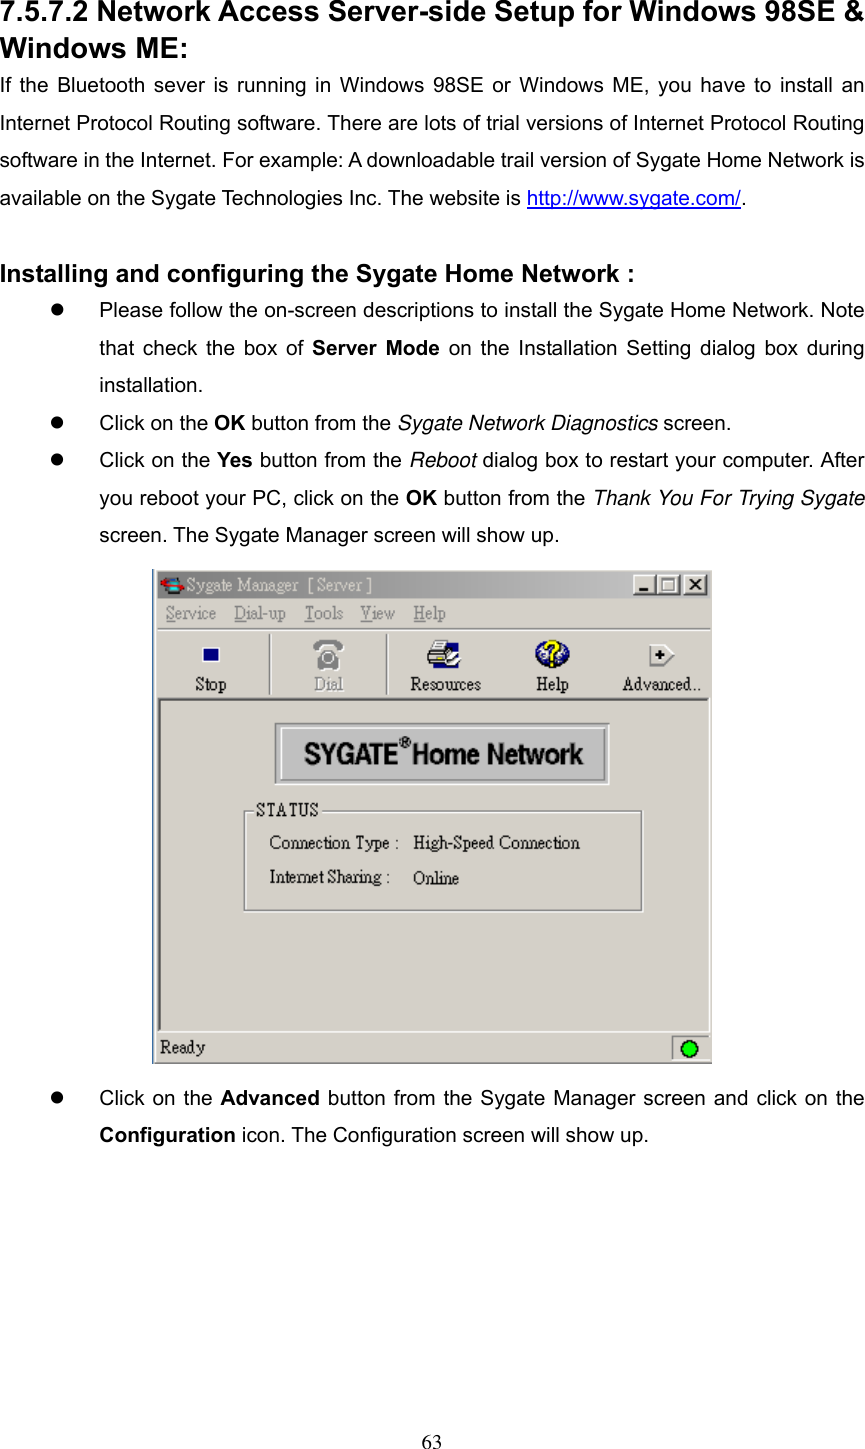  7.5.7.2 Network Access Server-side Setup for Windows 98SE &amp; Windows ME: If the Bluetooth sever is running in Windows 98SE or Windows ME, you have to install an Internet Protocol Routing software. There are lots of trial versions of Internet Protocol Routing software in the Internet. For example: A downloadable trail version of Sygate Home Network is available on the Sygate Technologies Inc. The website is http://www.sygate.com/.   Installing and configuring the Sygate Home Network :   Please follow the on-screen descriptions to install the Sygate Home Network. Note that check the box of Server Mode on the Installation Setting dialog box during installation.    Click on the OK button from the Sygate Network Diagnostics screen.    Click on the Yes button from the Reboot dialog box to restart your computer. After you reboot your PC, click on the OK button from the Thank You For Trying Sygate screen. The Sygate Manager screen will show up.    Click on the Advanced button from the Sygate Manager screen and click on the Configuration icon. The Configuration screen will show up.  63 